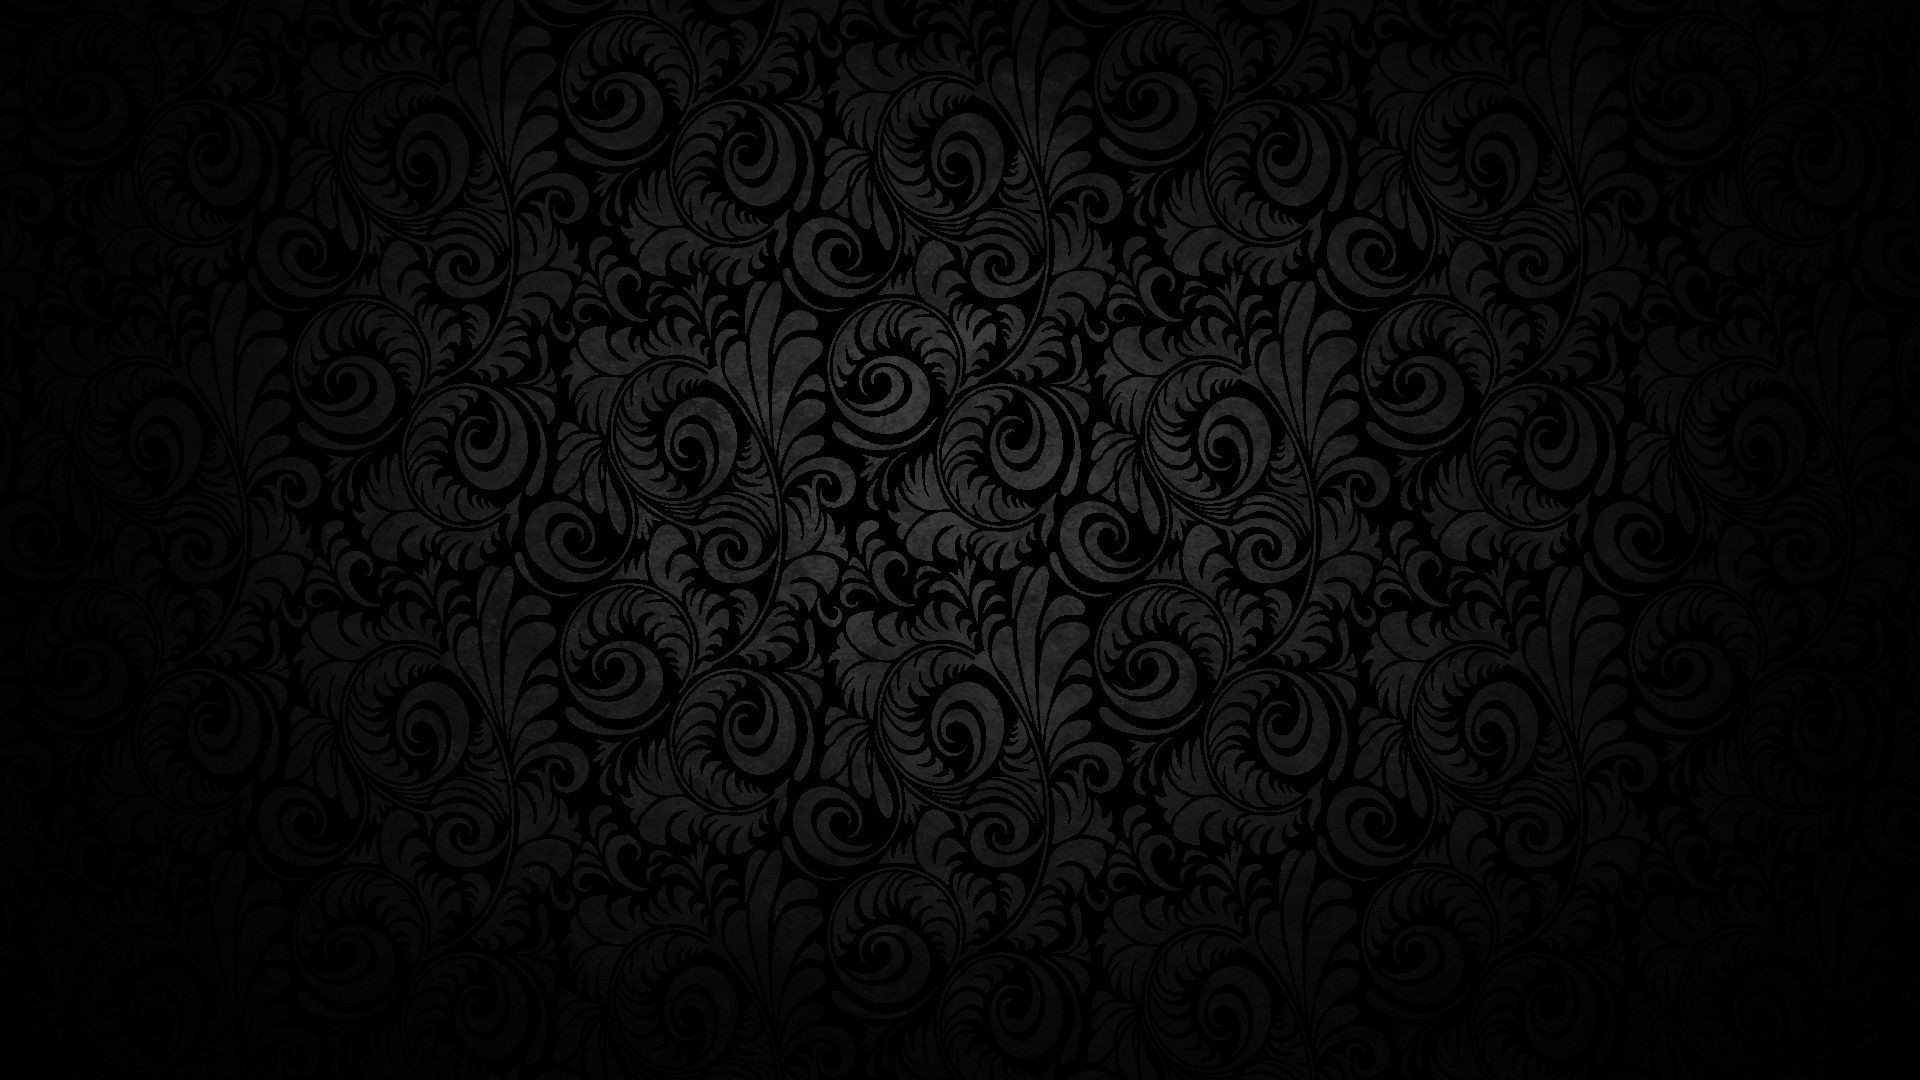 1080p Wallpaper Of Abstract Black Swirl Wallpaper Background